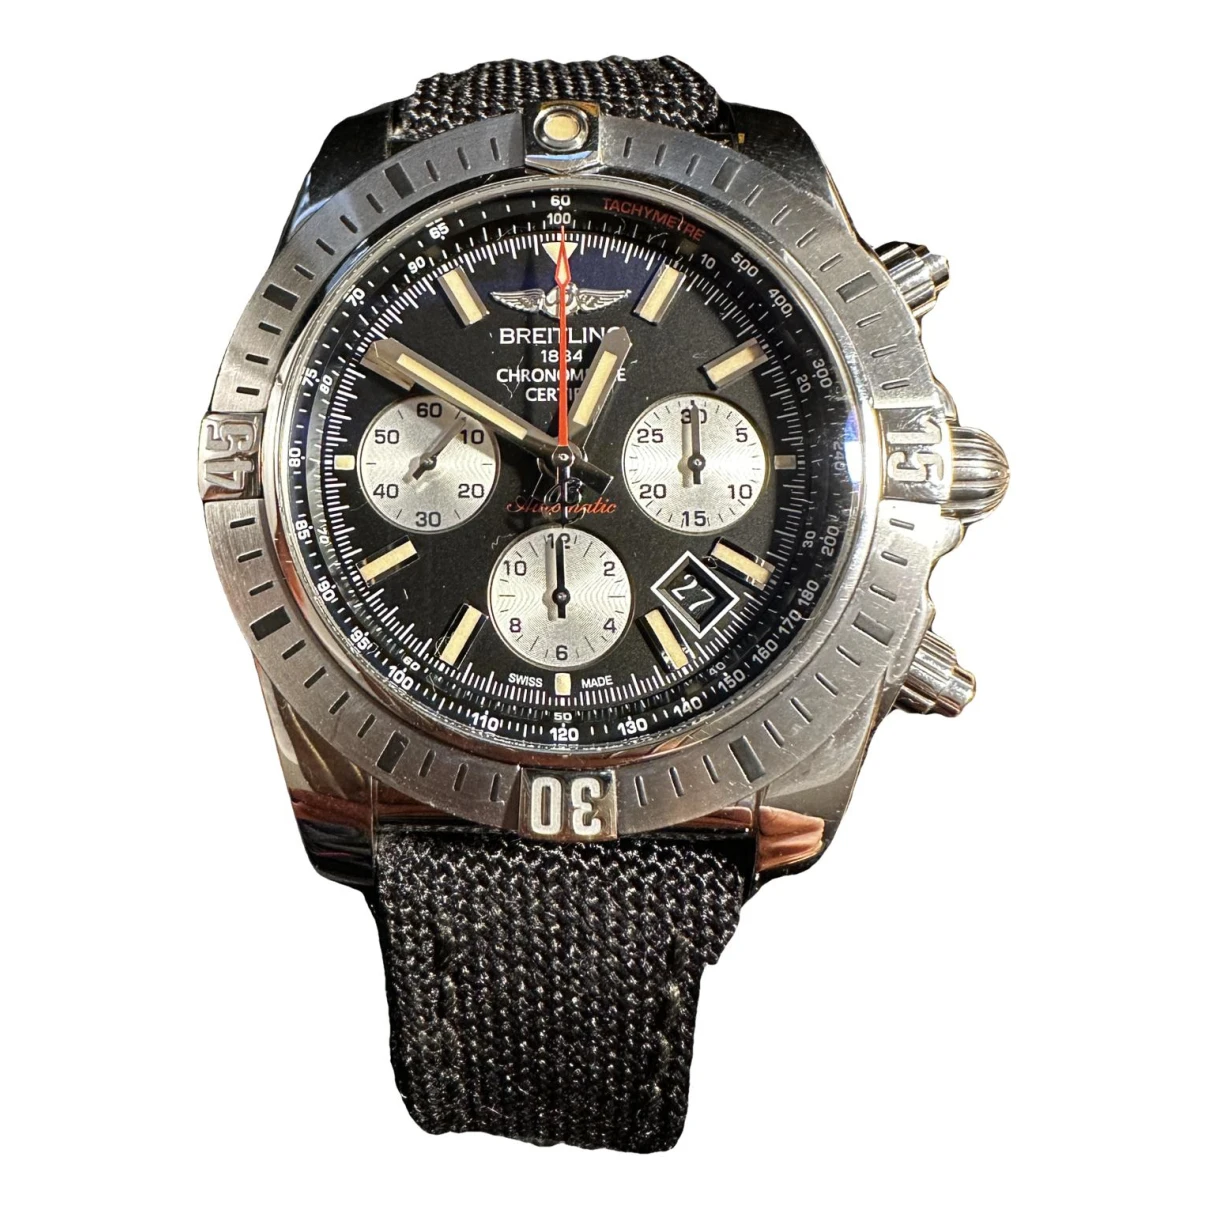 Pre-owned Breitling Chronomat Watch In Black